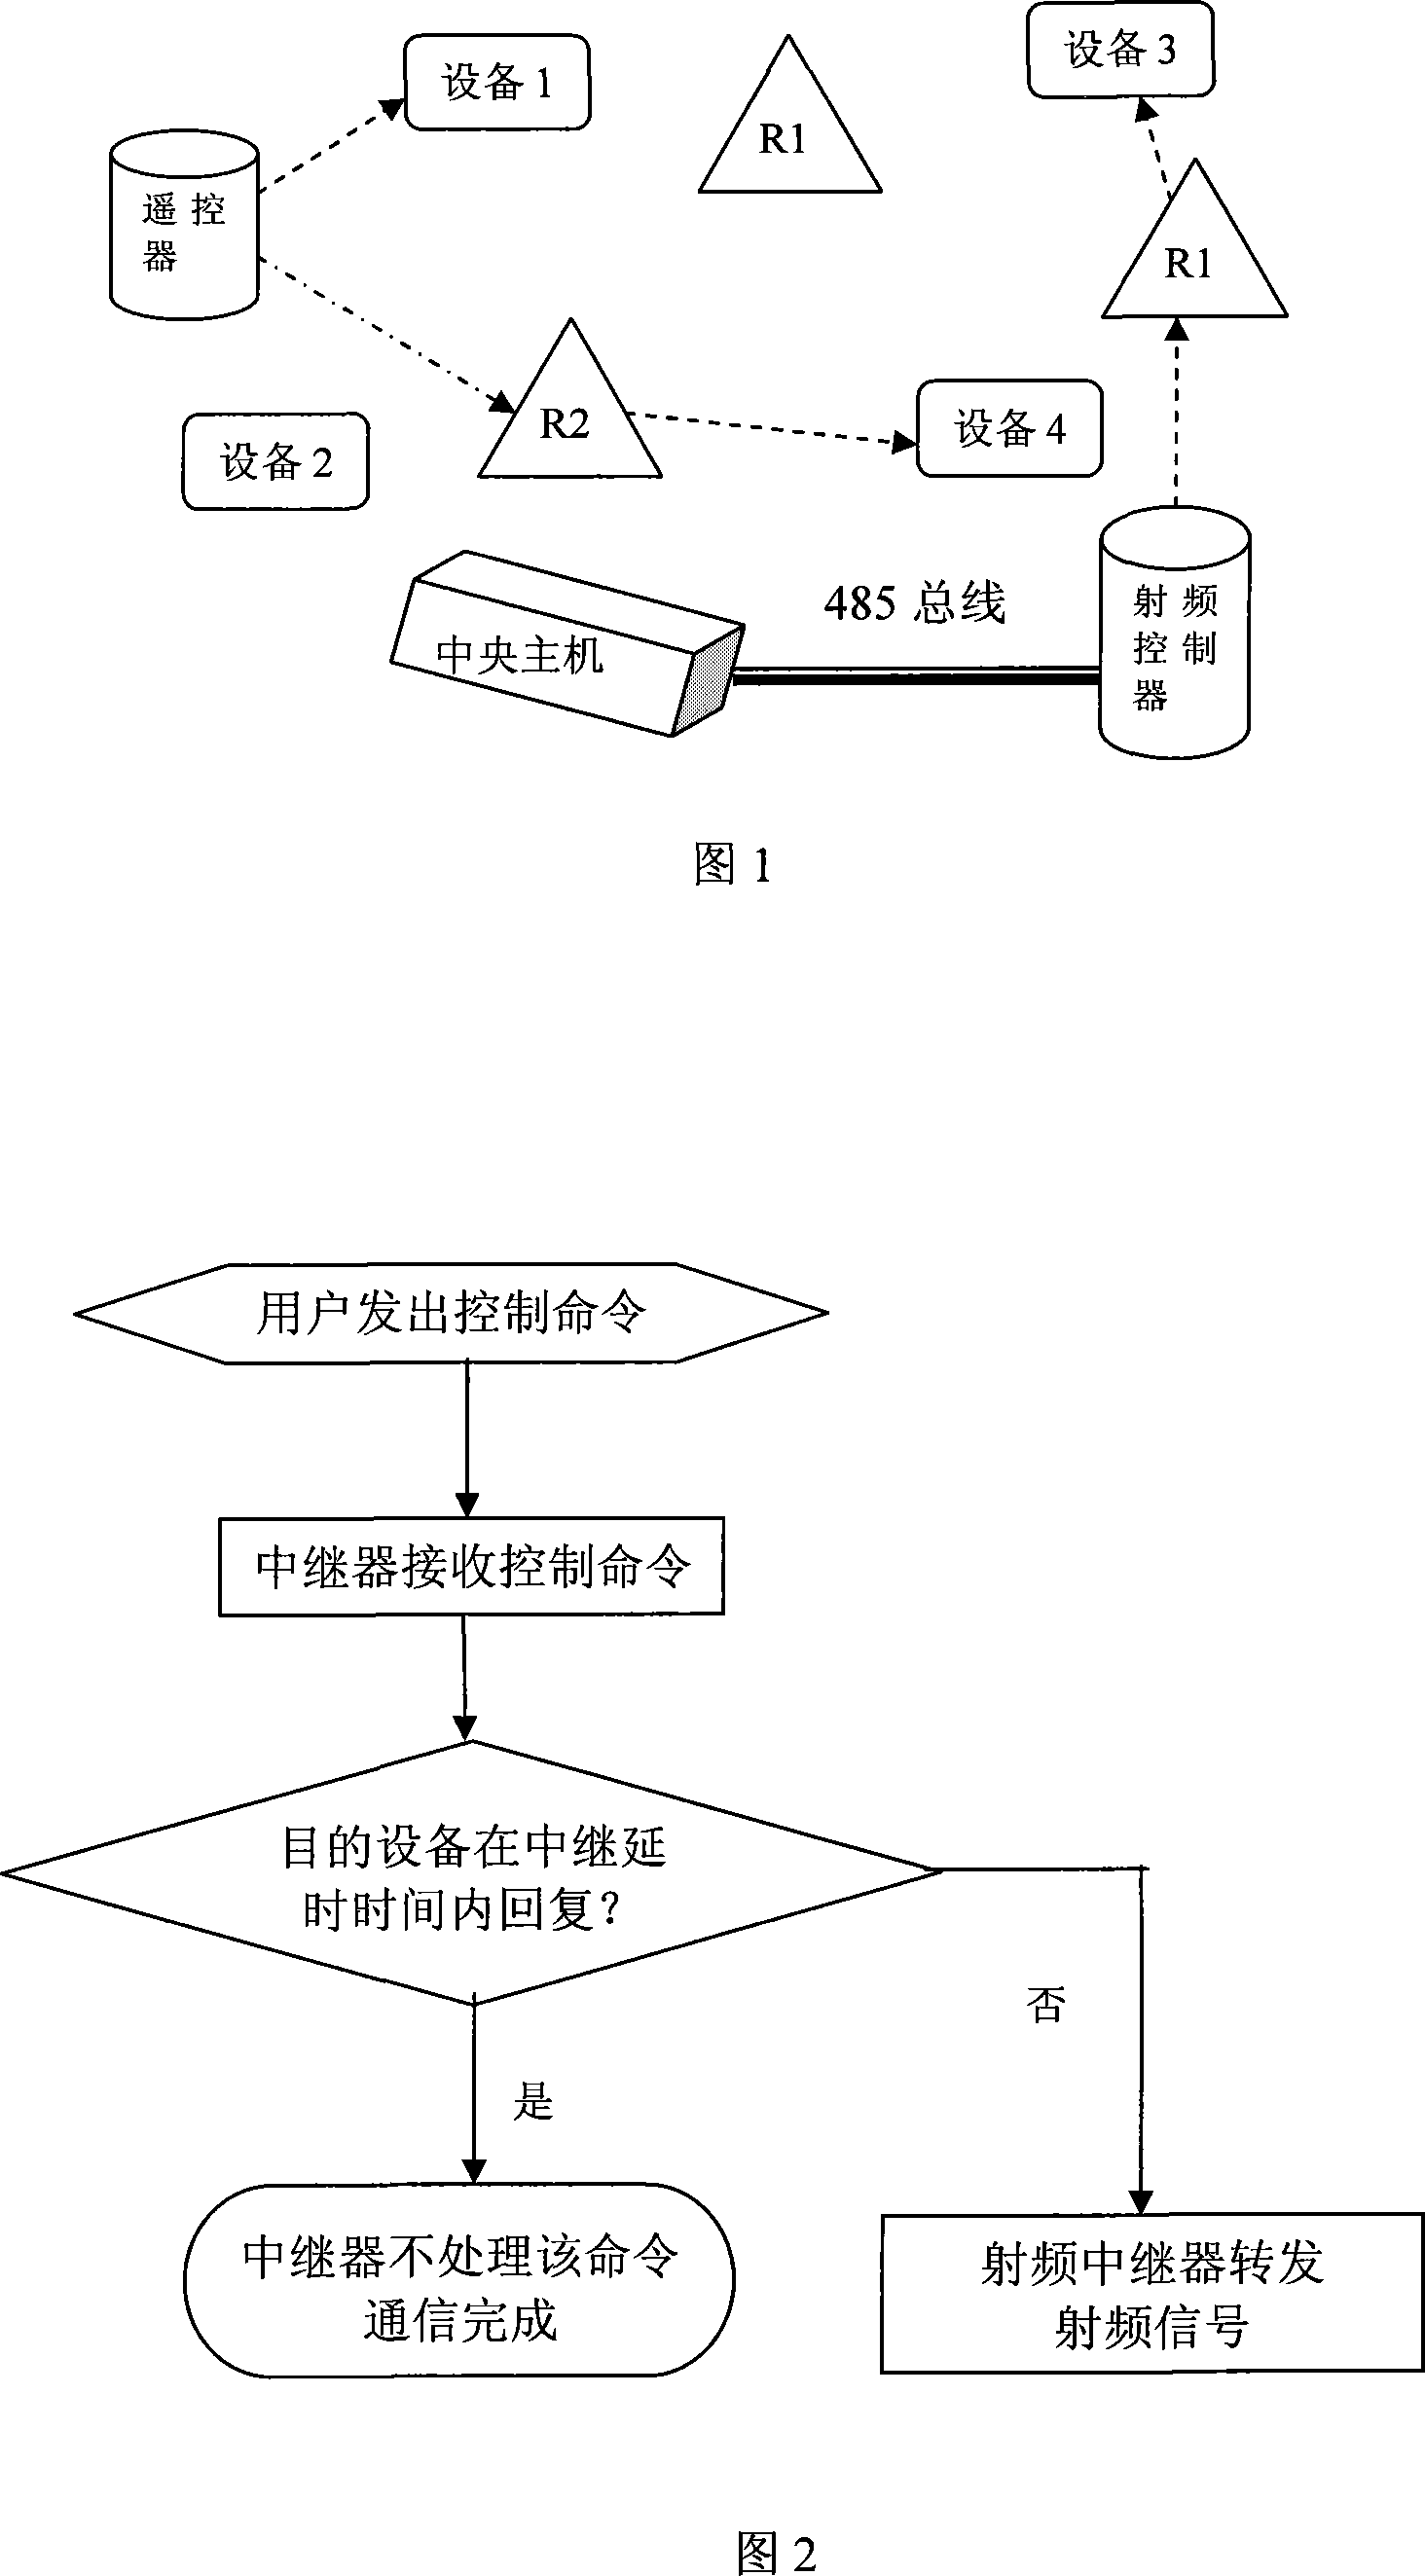 Method for implementing distant control of digital family network appliance